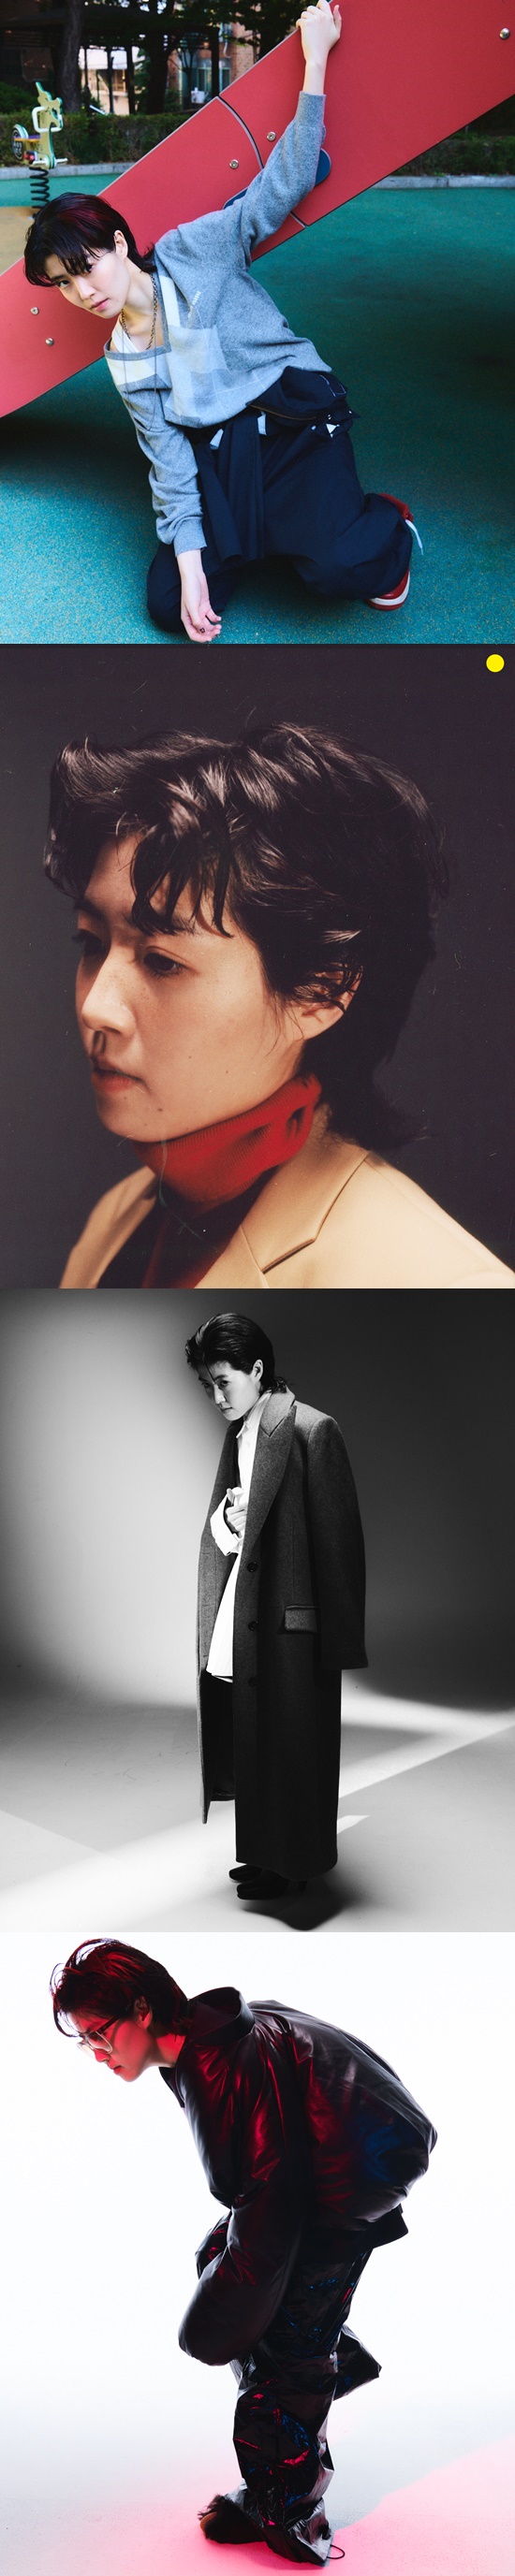 Actor Shim Eun-kyung boasted a variety of charms through magazine pictures.Shim Eun-kyung showed off her extraordinary charm through an undisclosed B-cut in the fashion magazine Days de pictorial.Shim Eun-kyung in the public photos attracts attention by completing various moods of pictures that can not be believed to be B cuts.Shim Eun-kyung, who showed a free and unstoppable atmosphere with his own style of freckled makeup, color hairpiece, oversized long coat, rock mood and stylish outfits with vintage style, .In addition, Shim Eun-kyung instinctively knows what to express himself in the shooting scene, and he is in the back door to finish the high-quality cuts and to impress the staff.On the other hand, Shim Eun-kyung recently completed the official schedule of the festival as a jury member of the competition section of the 35th Tokyo International Film Festival.Shim Eun-kyung is an actor who has attracted the attention of the Korean film industry by bringing out the sympathy of the previous generation with persuasive character acting for every work such as Sunny and Suspicious Girl.Shim Eun-kyung, who shows a step forward in every work and pioneers his way forward, recently attended the special talk event at the 27th Pusan International Film Festival and participated as a jury member of the competition section of the 35th Tokyo International Film Festival. .Recently, I finished shooting the movie The Starlight is falling.Photography = Dazed